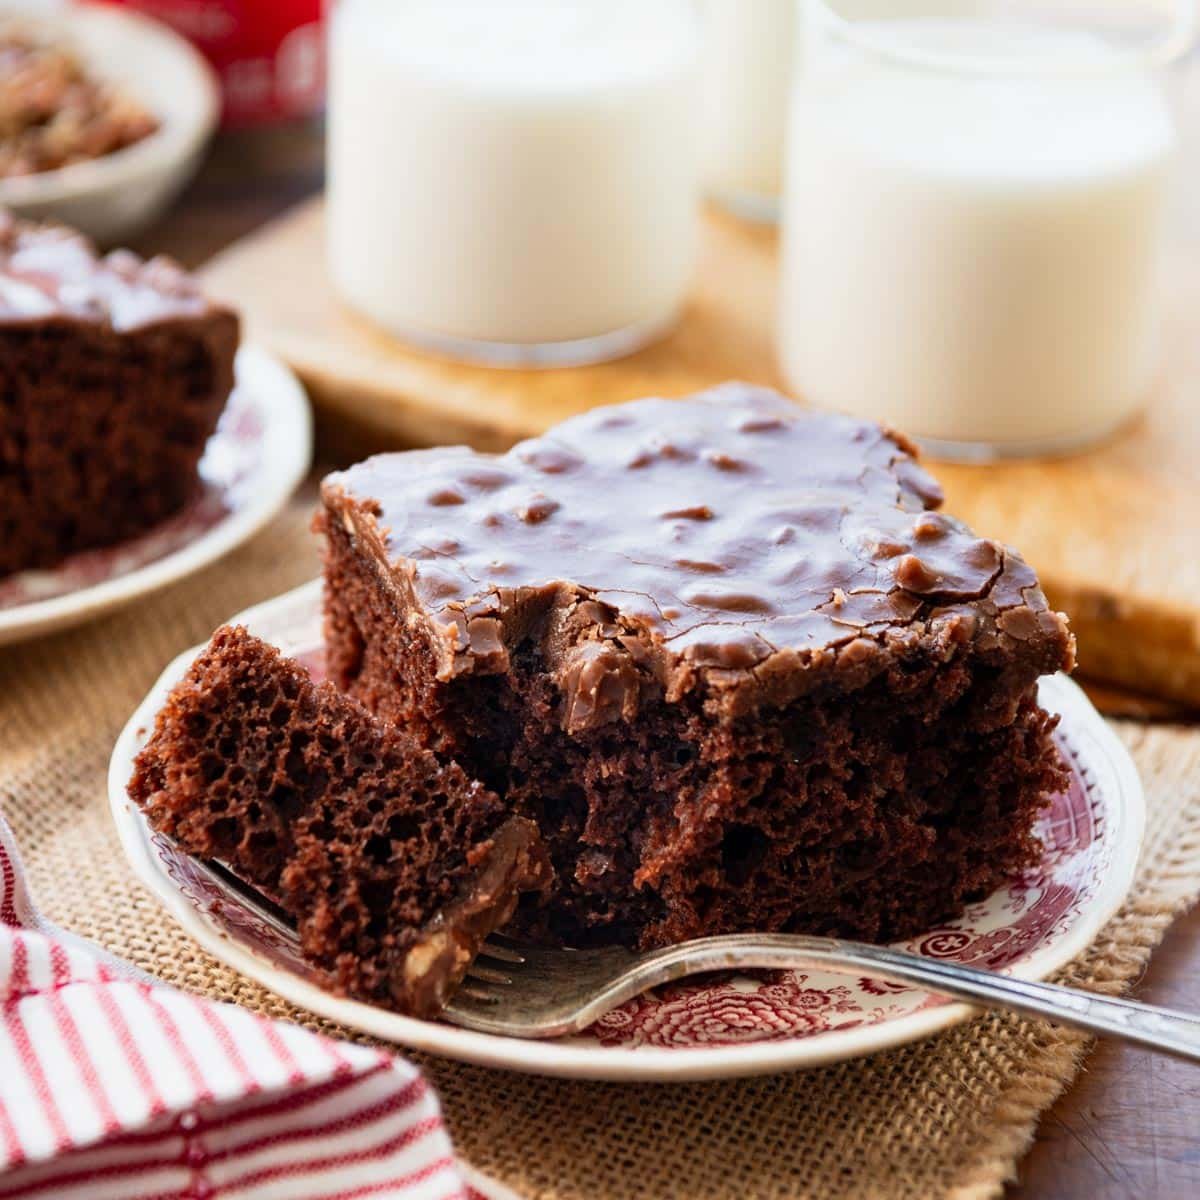 Coca cola cake recipe served on a plate with glasses of milk on the side.